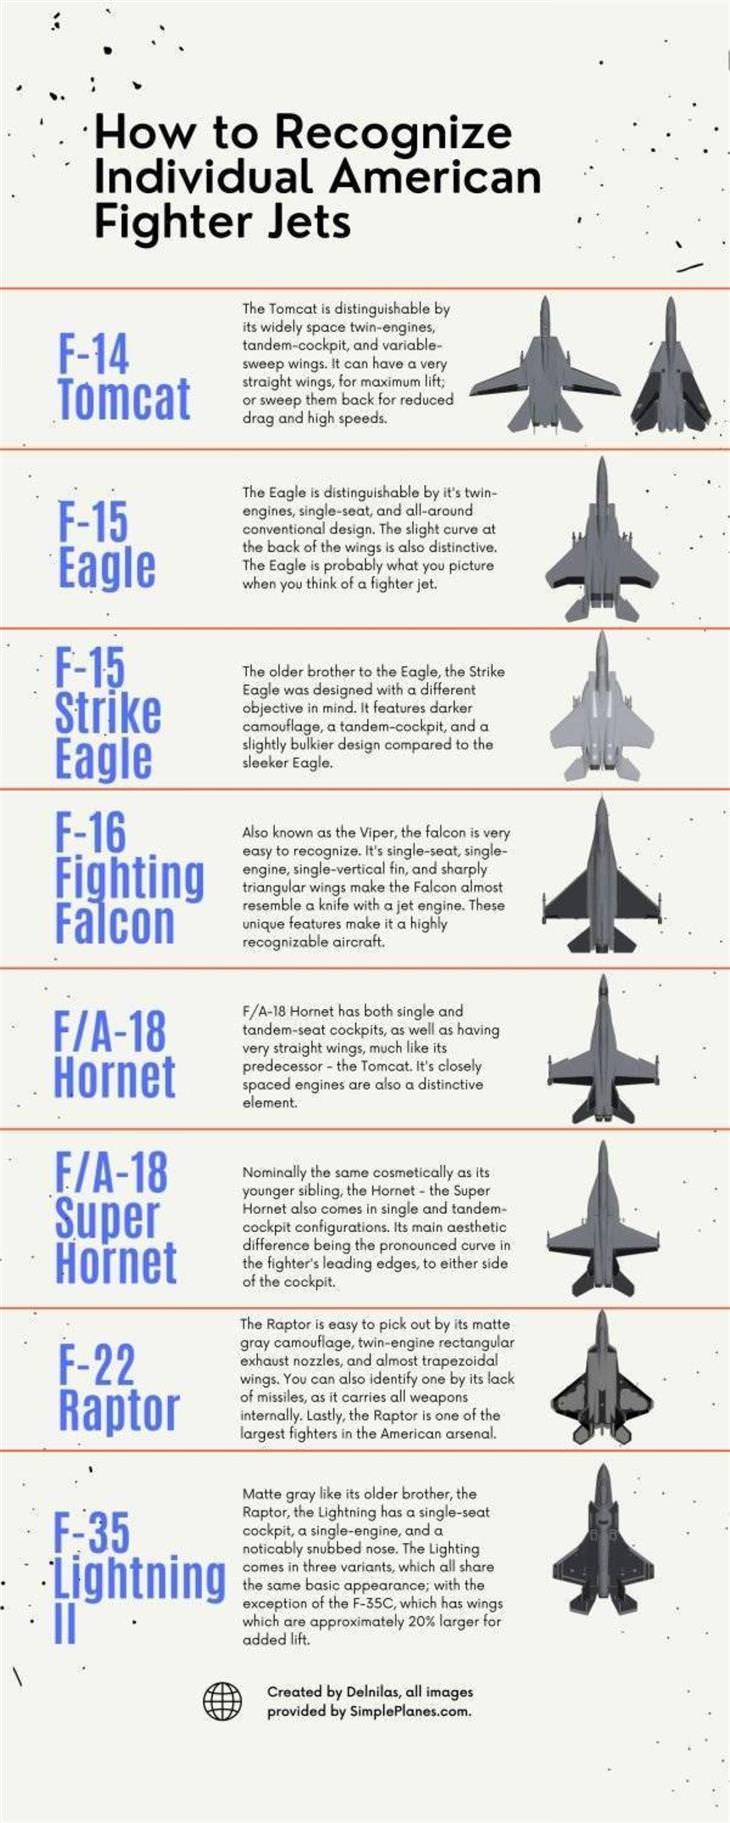 Charts Vol 5 fighter jets